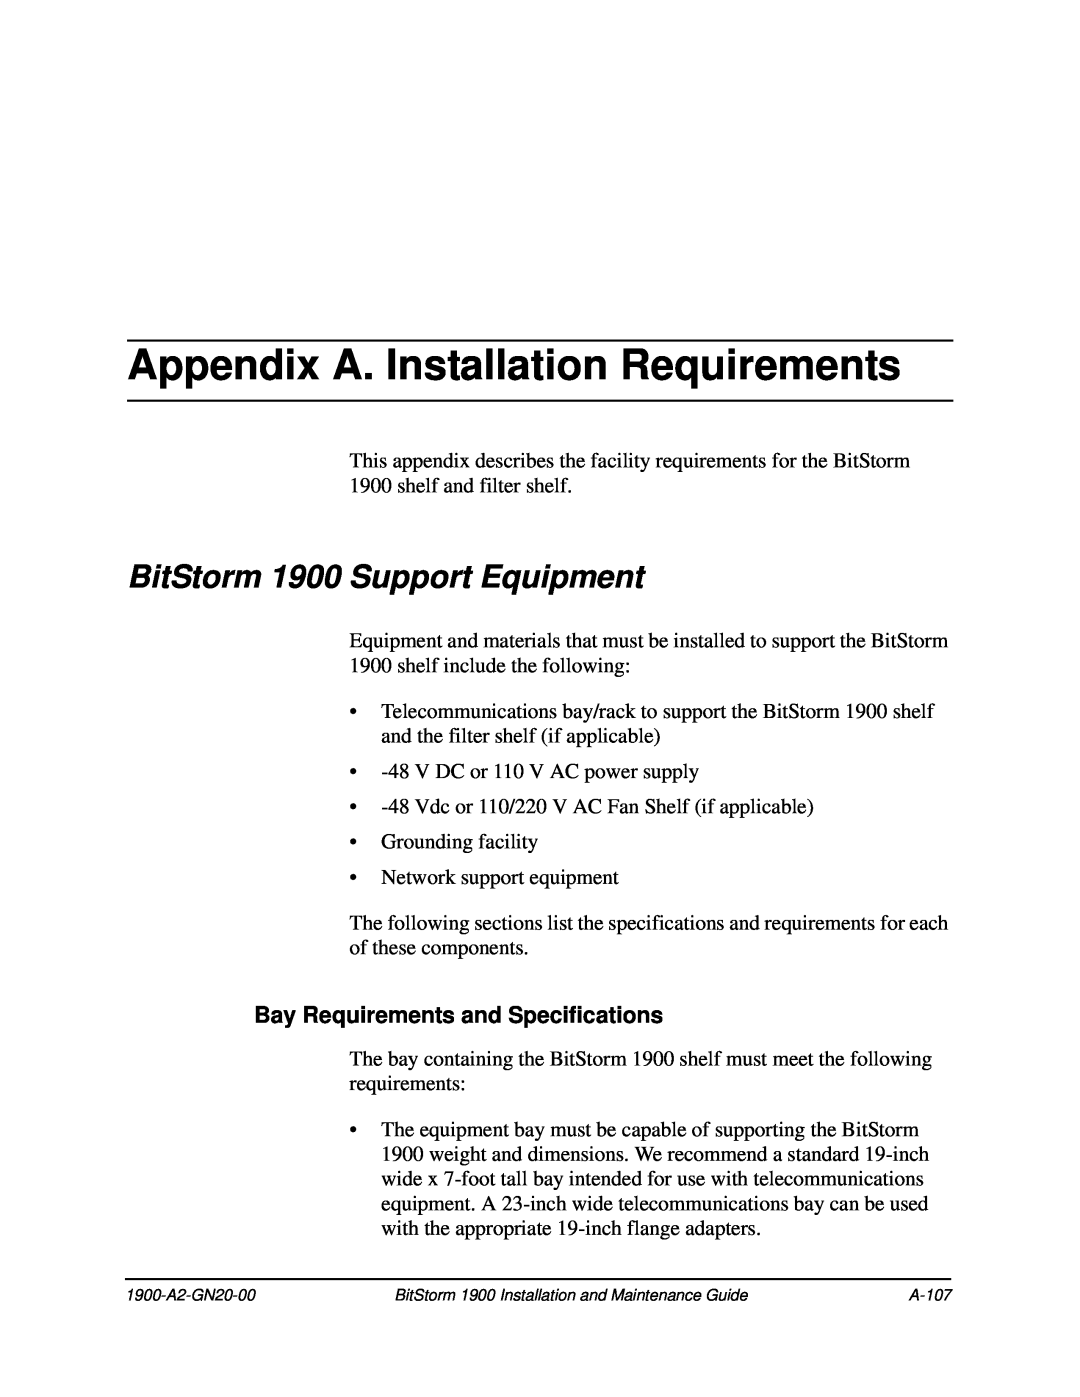 Paradyne Appendix A. Installation Requirements, BitStorm 1900 Support Equipment, Bay Requirements and Specifications 